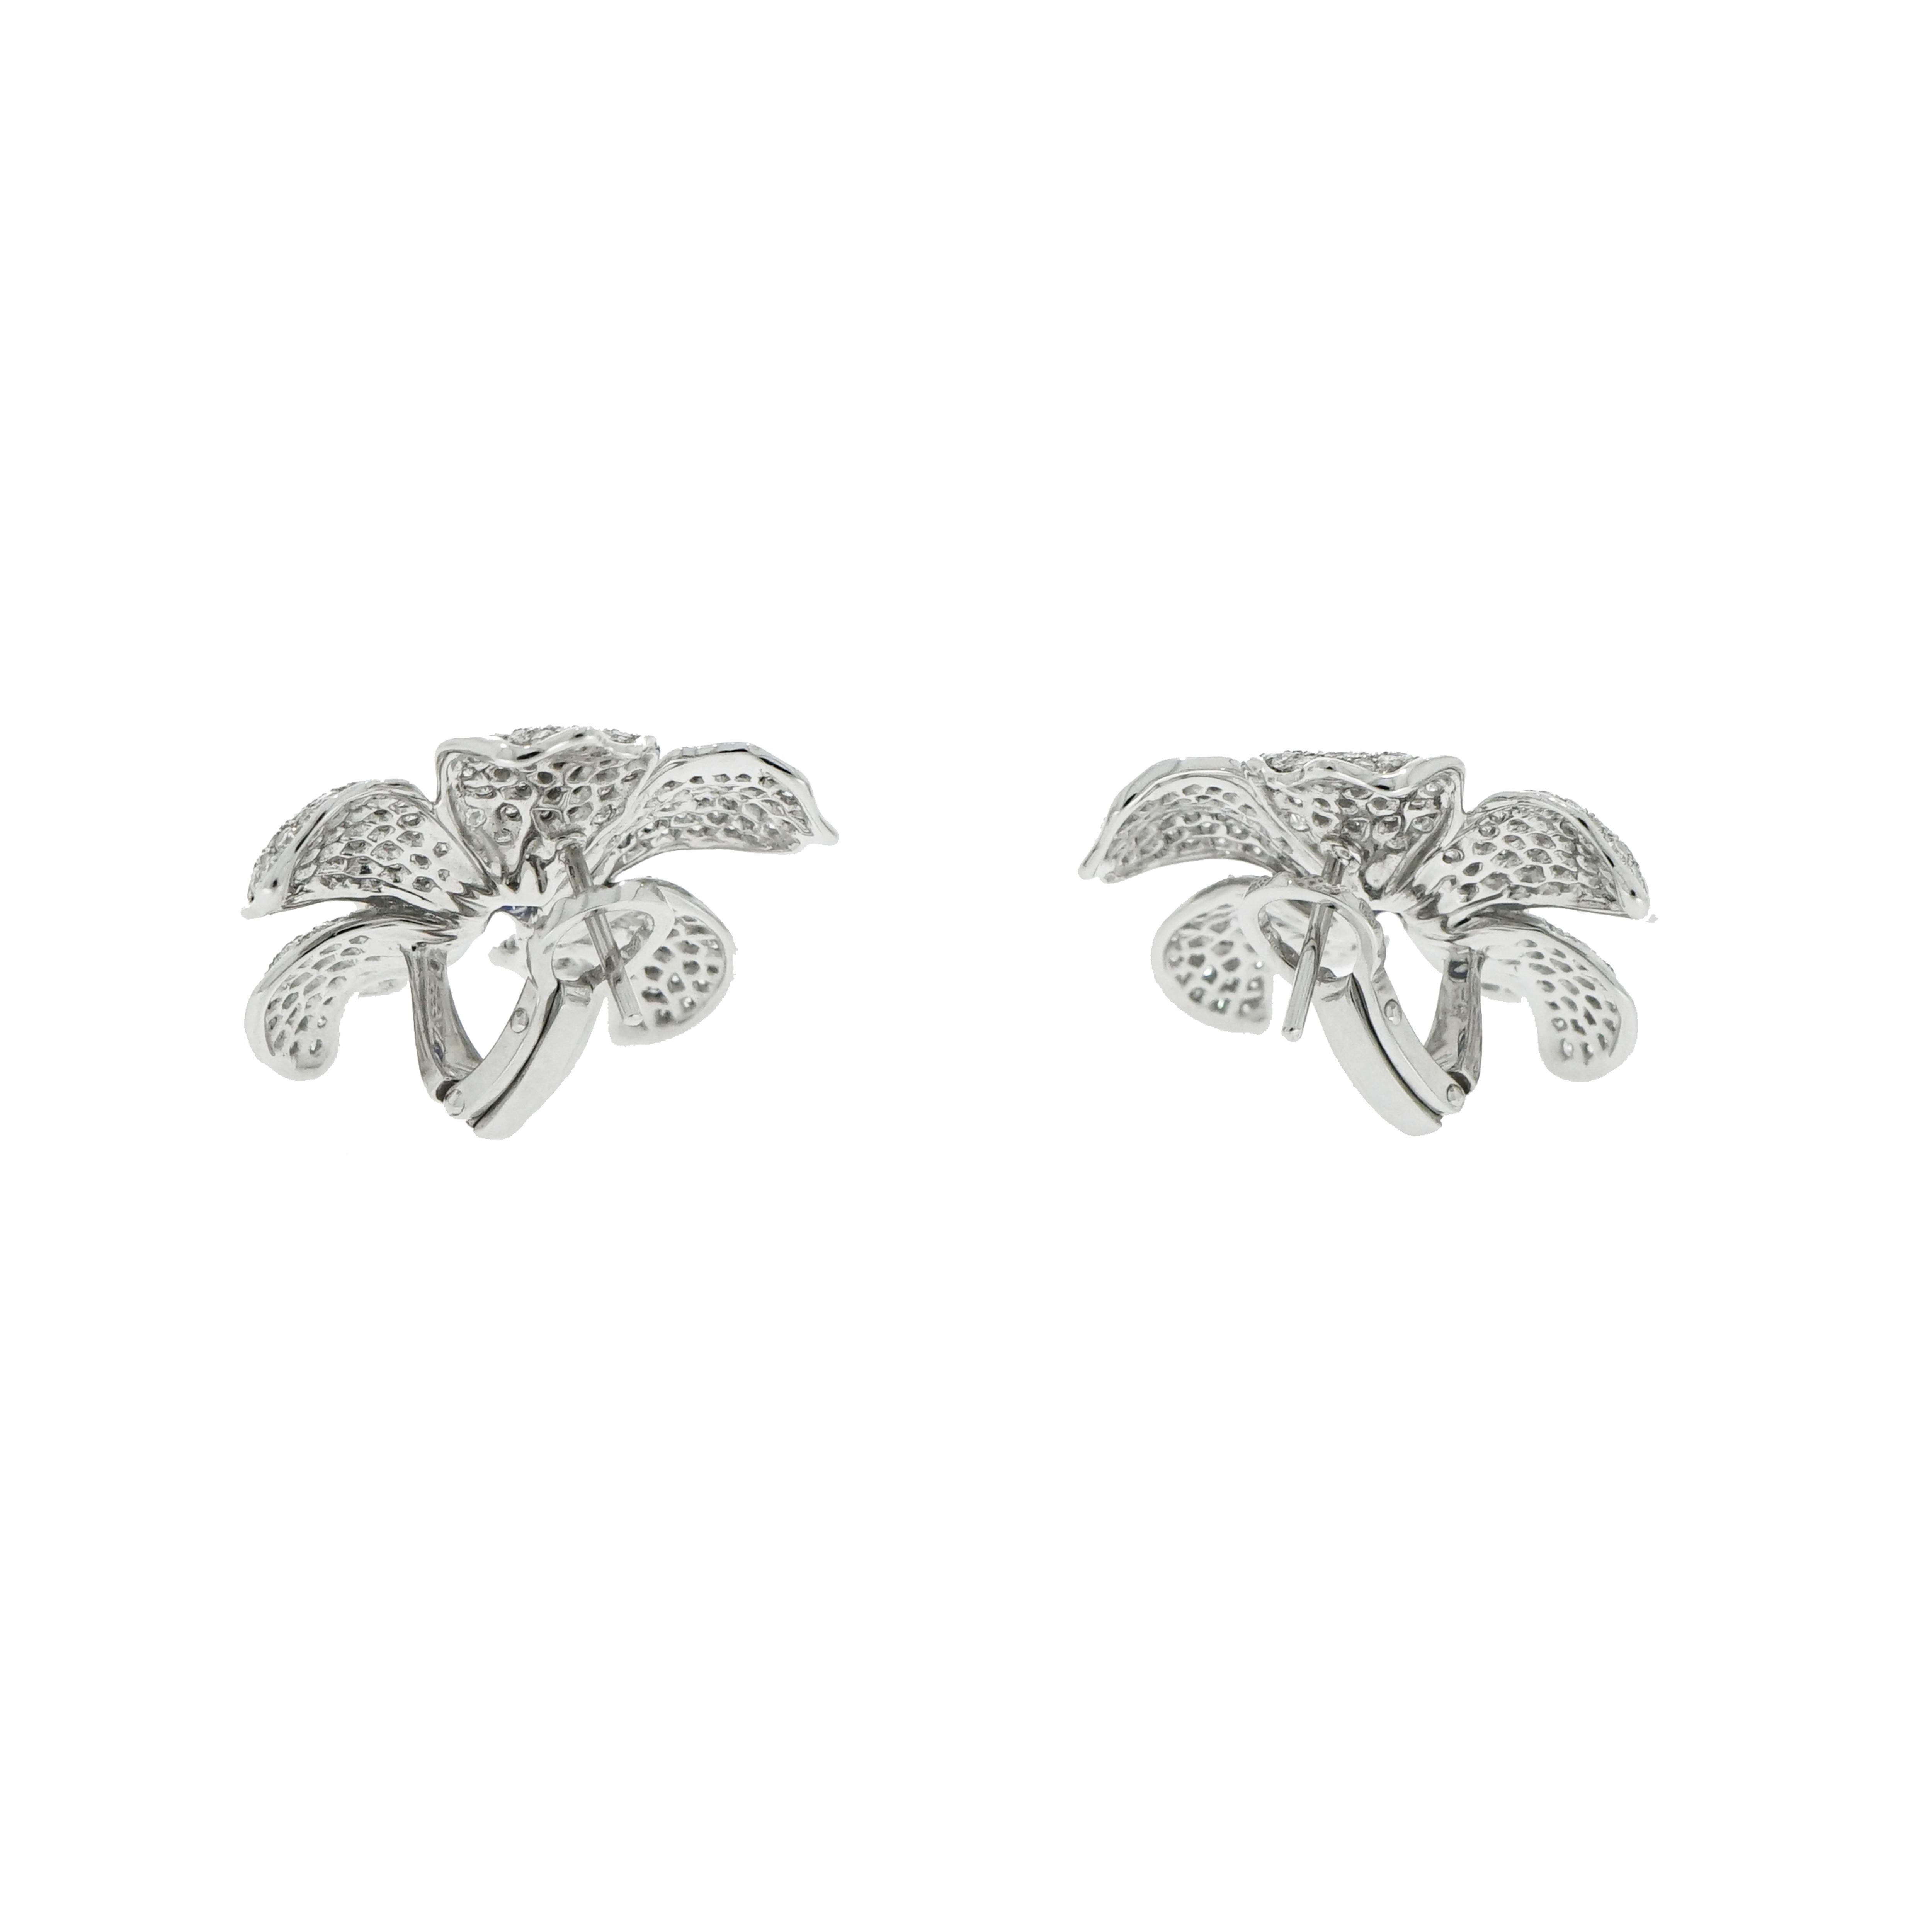 Oval Cut Diamond Sapphire Orchid White Gold Earrings by Carrera & Carrera